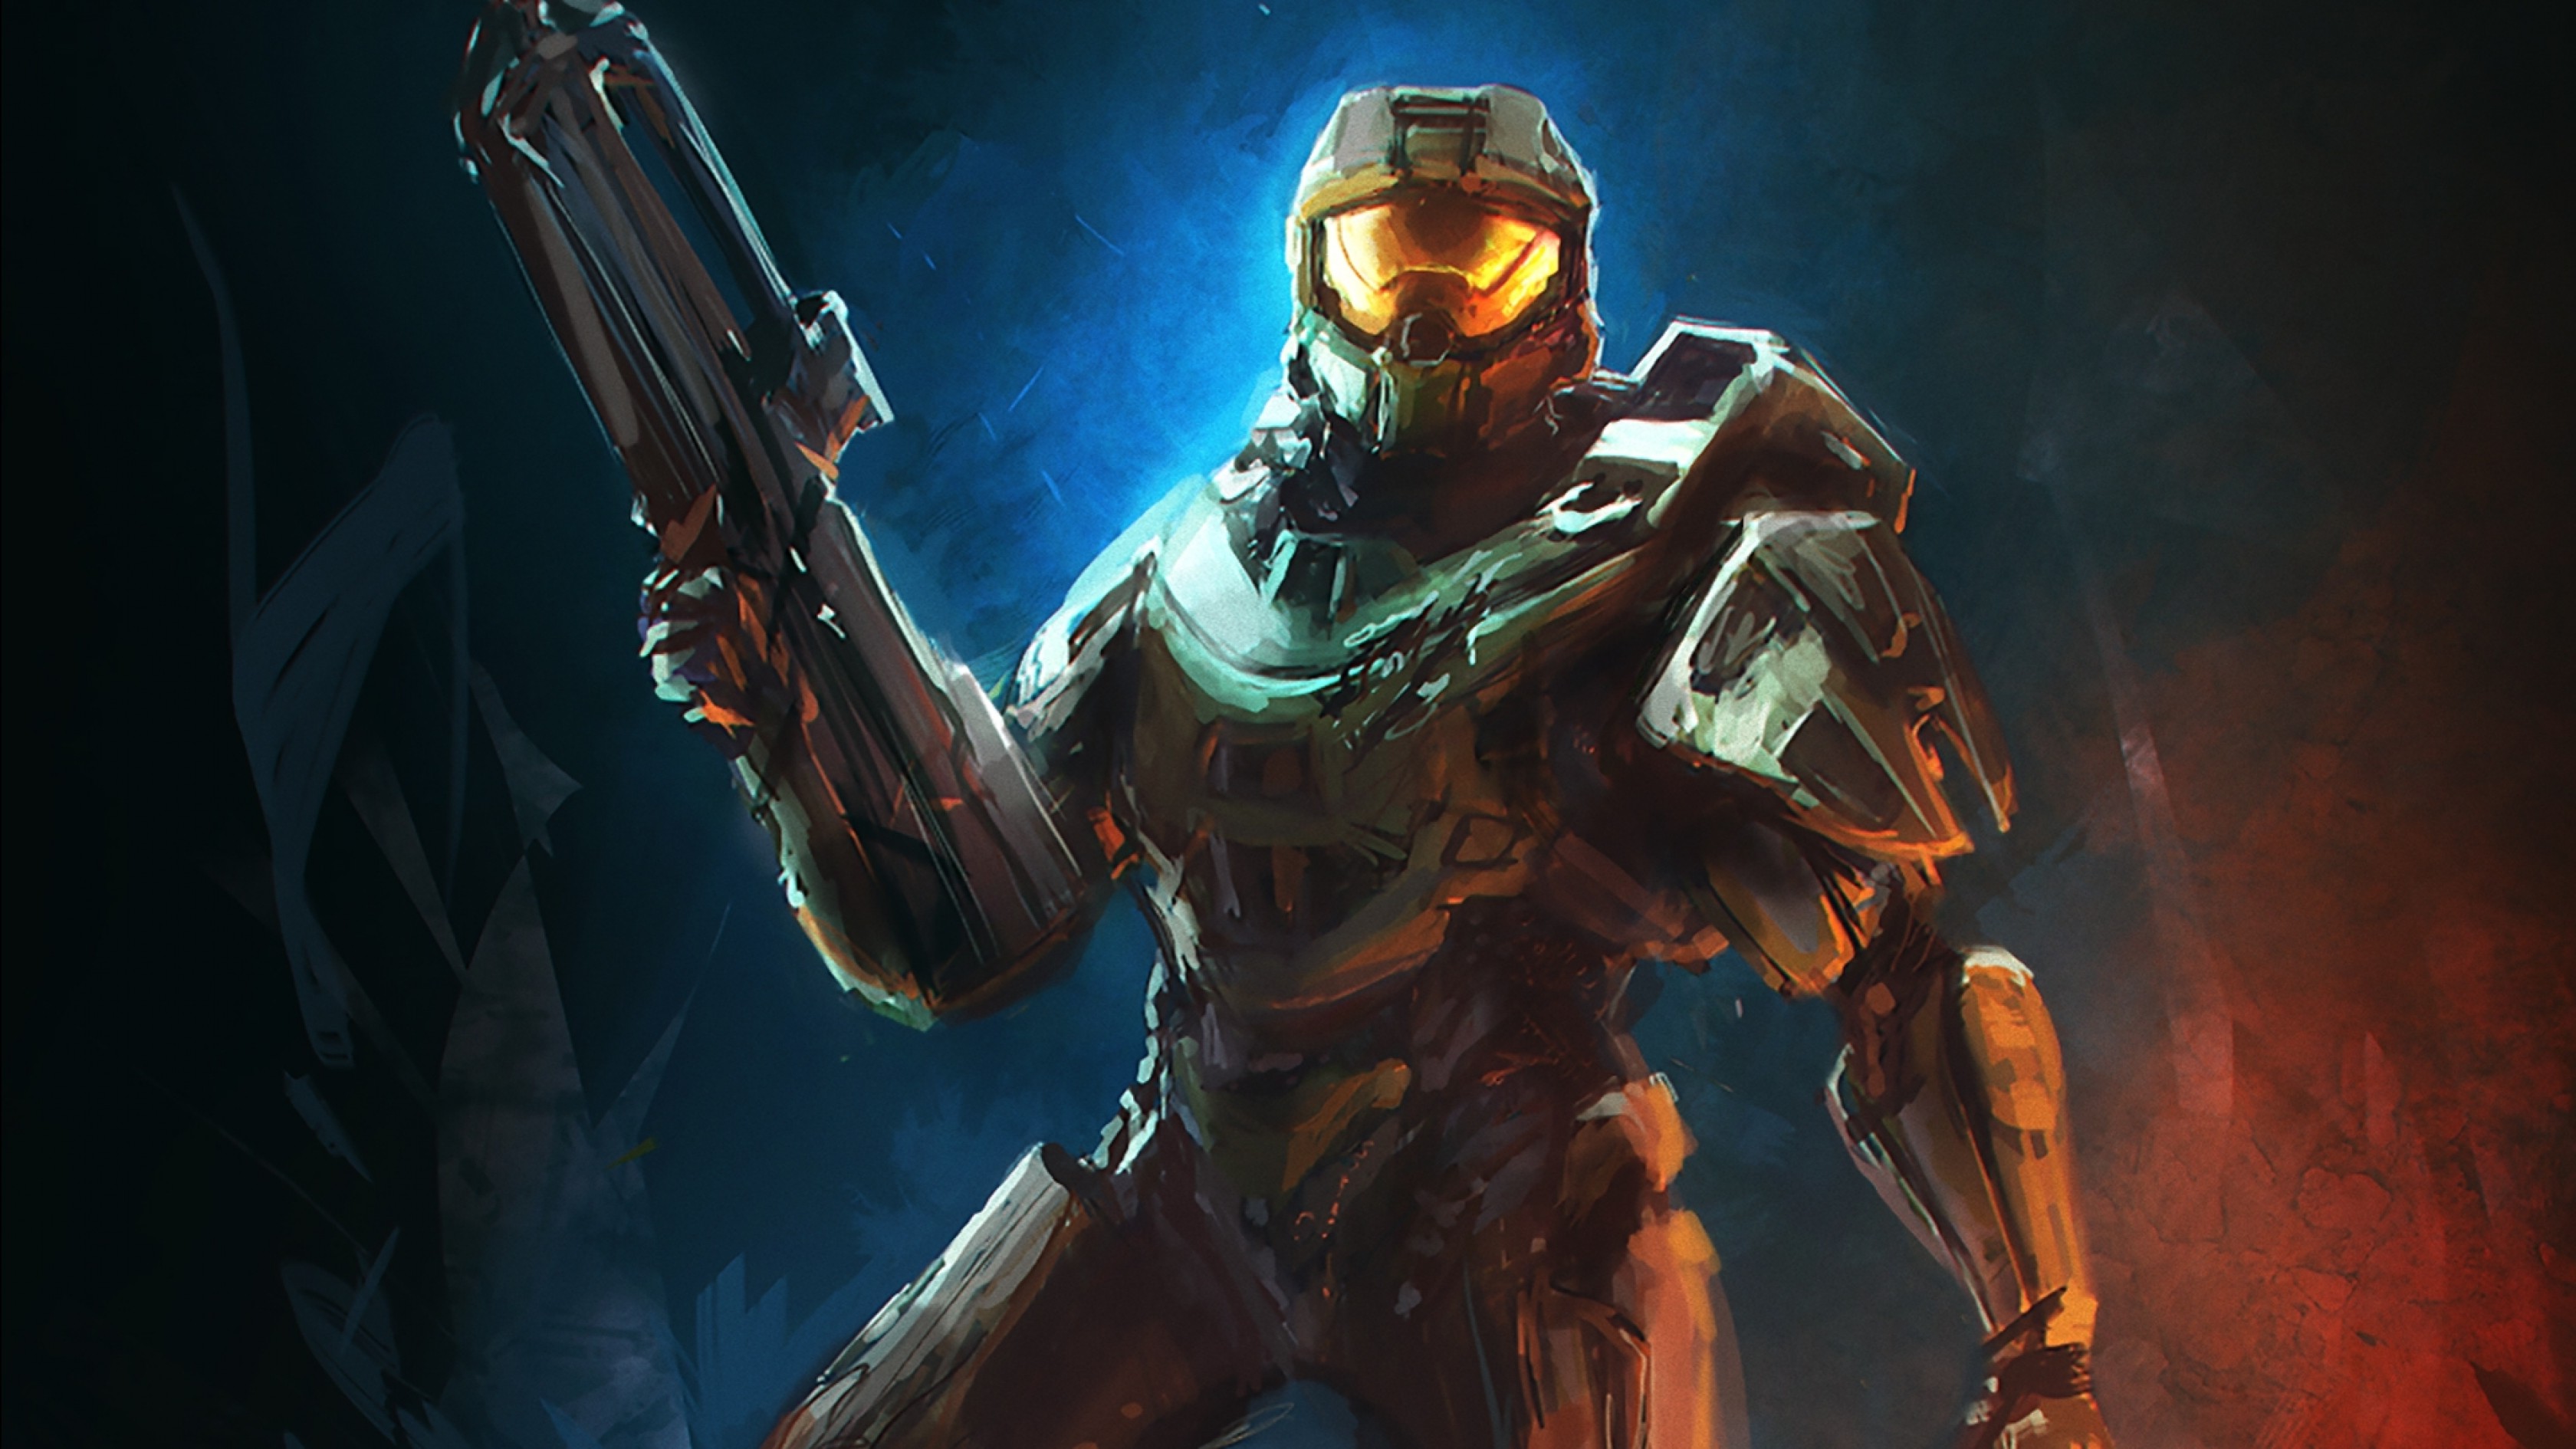 Halo, Master Chief, Halo 4, Xbox One, Video Games, Halo: Master Chief Collection, Artwork Wallpaper